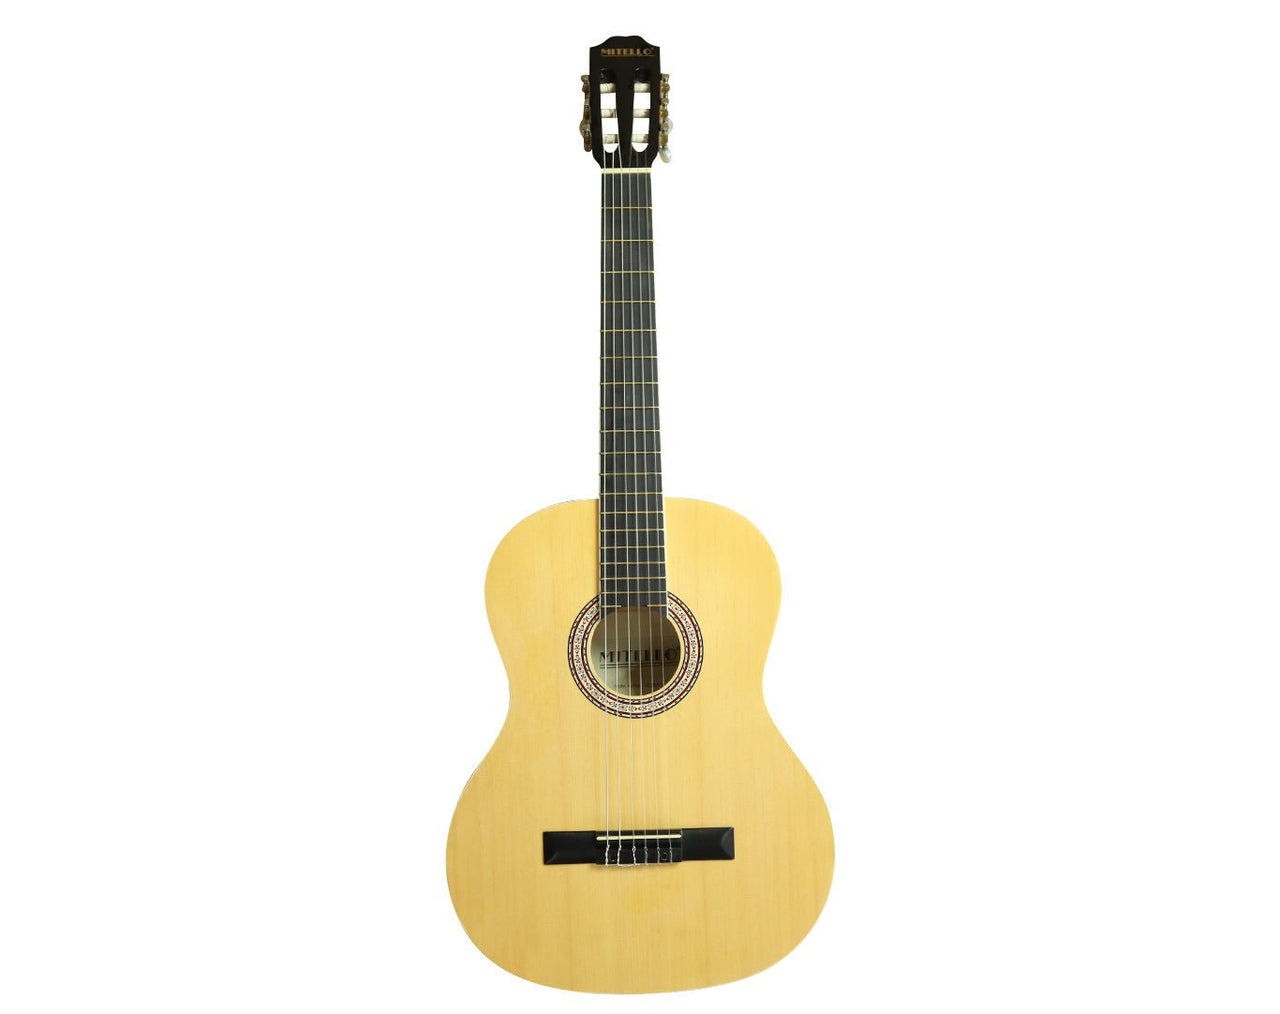 39" Classic Acoustic Guitar Natural Finish LC-3900-N